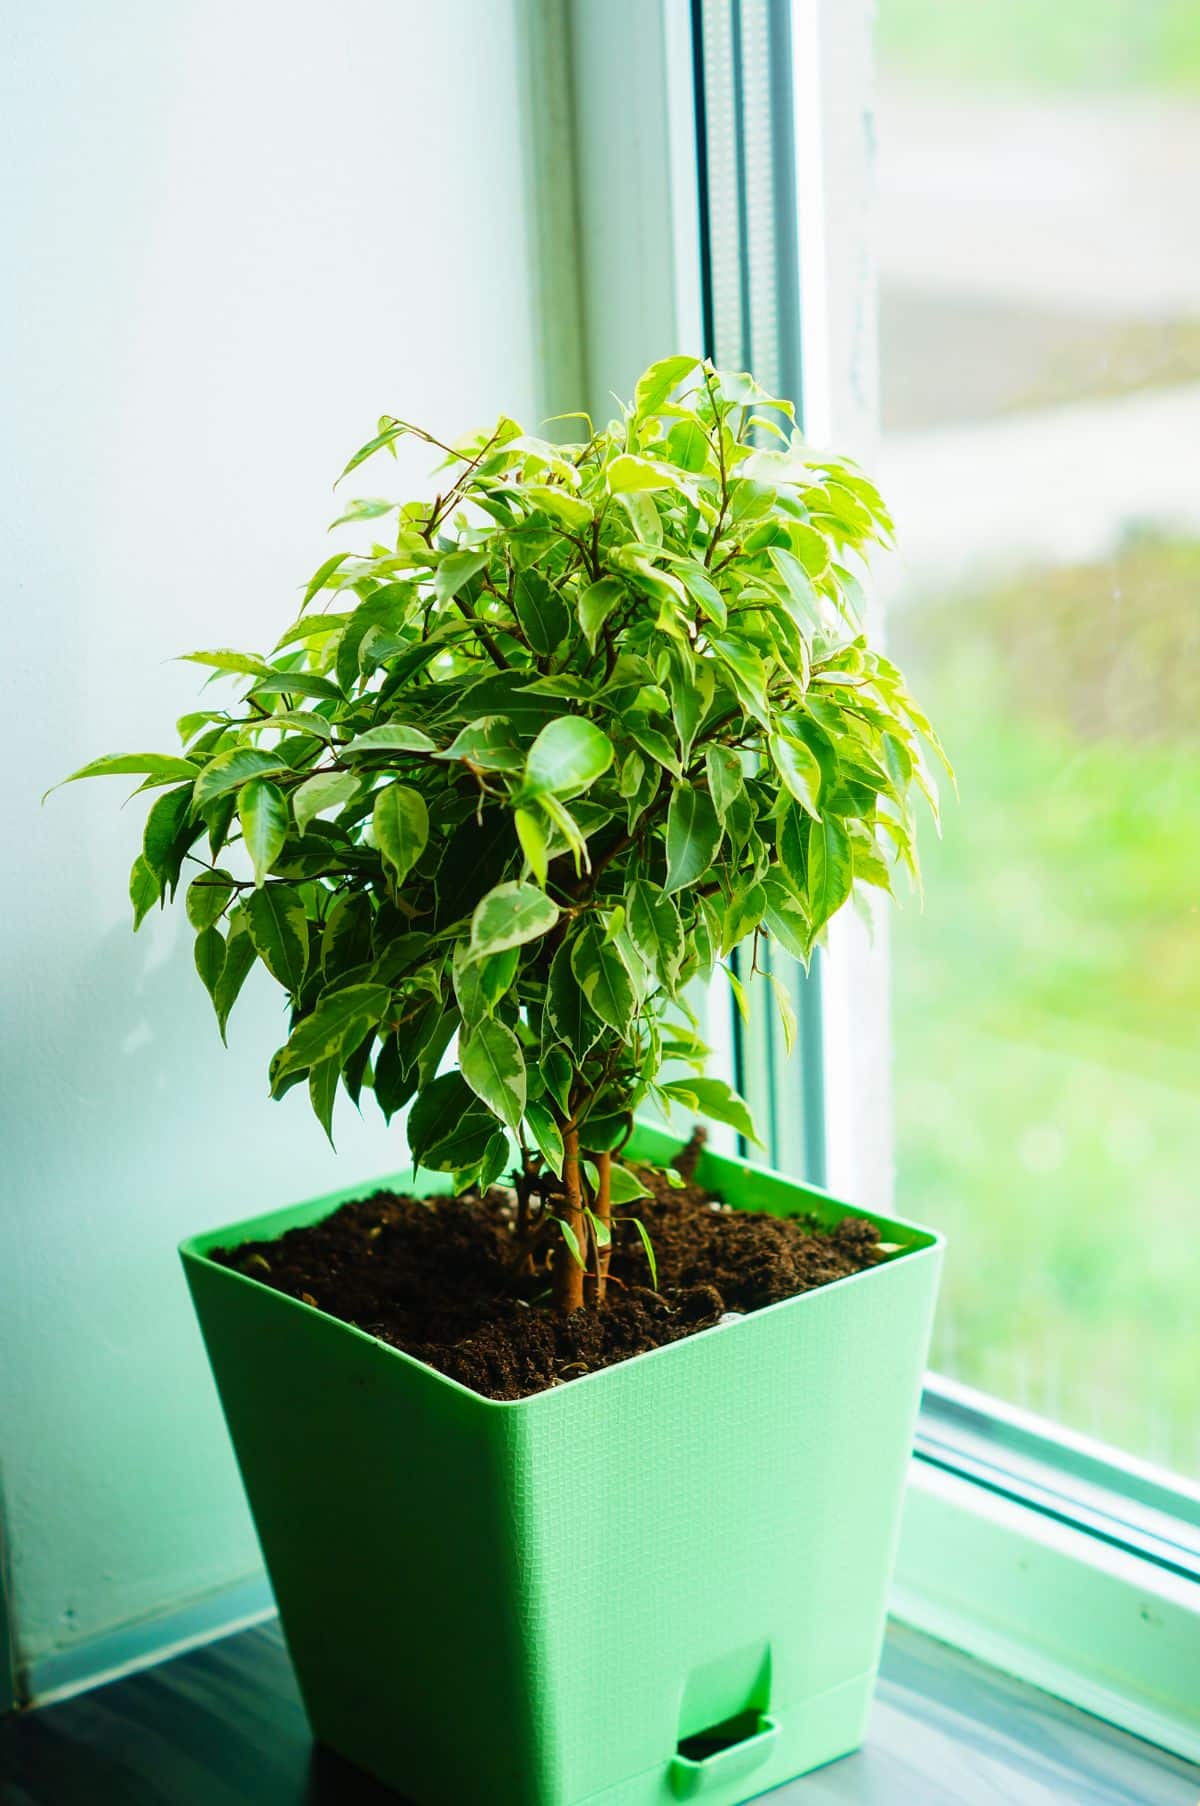 A young ficus tree in a green pot on a windowsill.